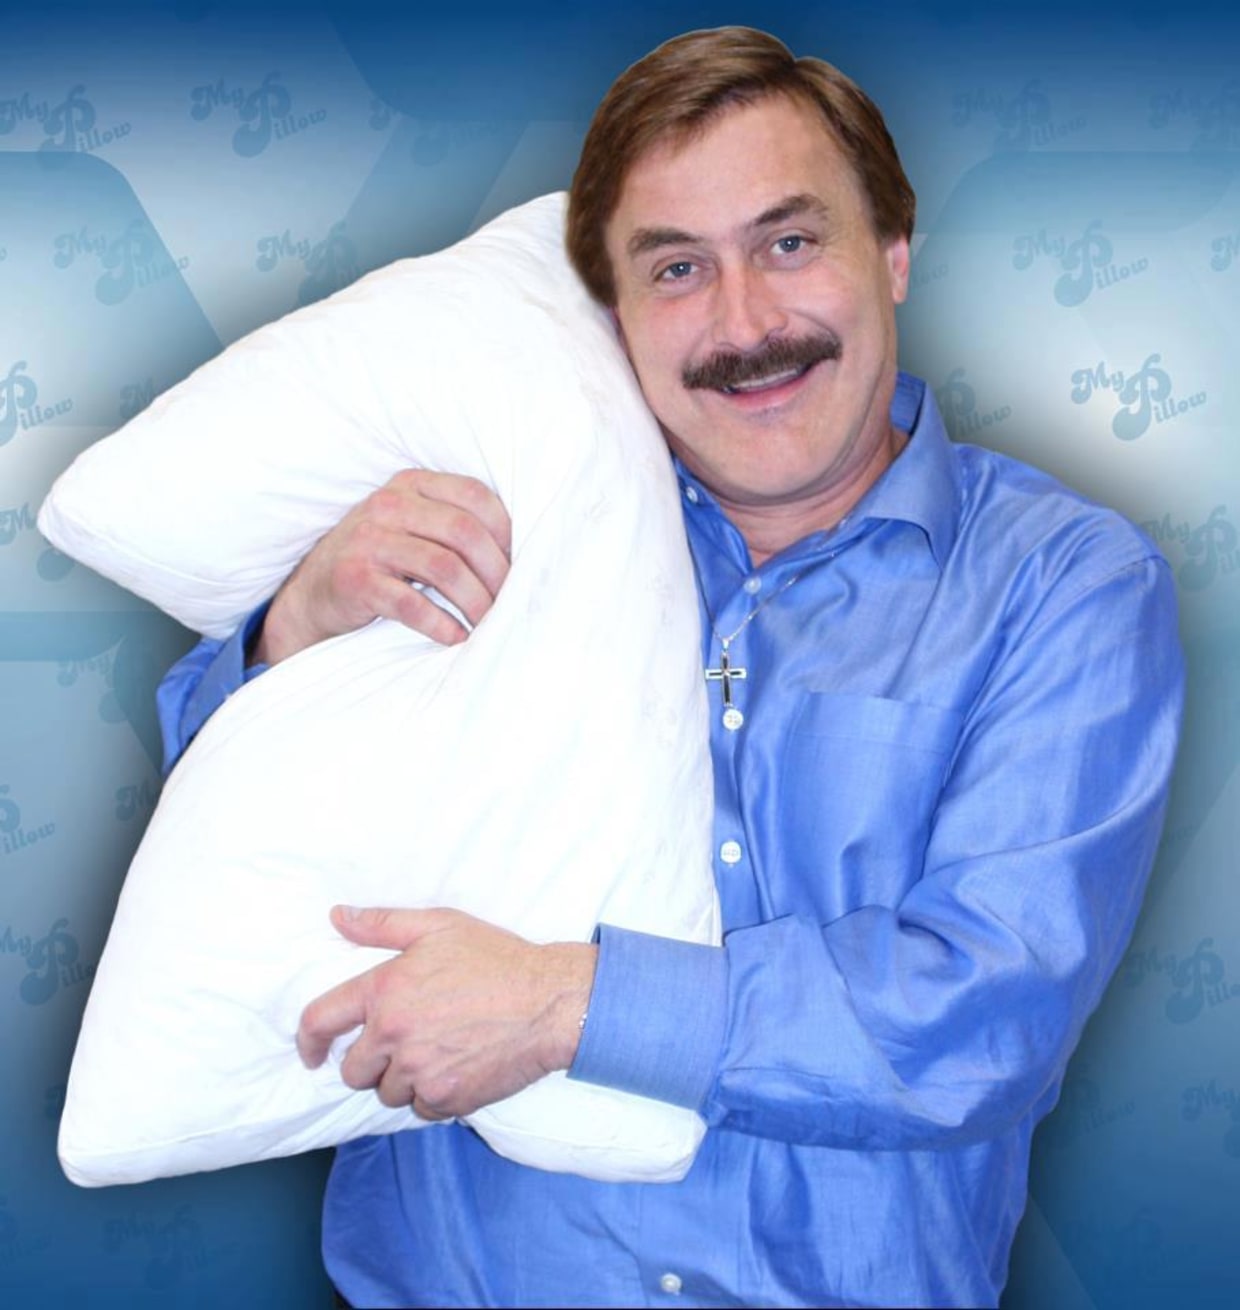 MyPillow Ordered to Pay $1M for Bogus Ads